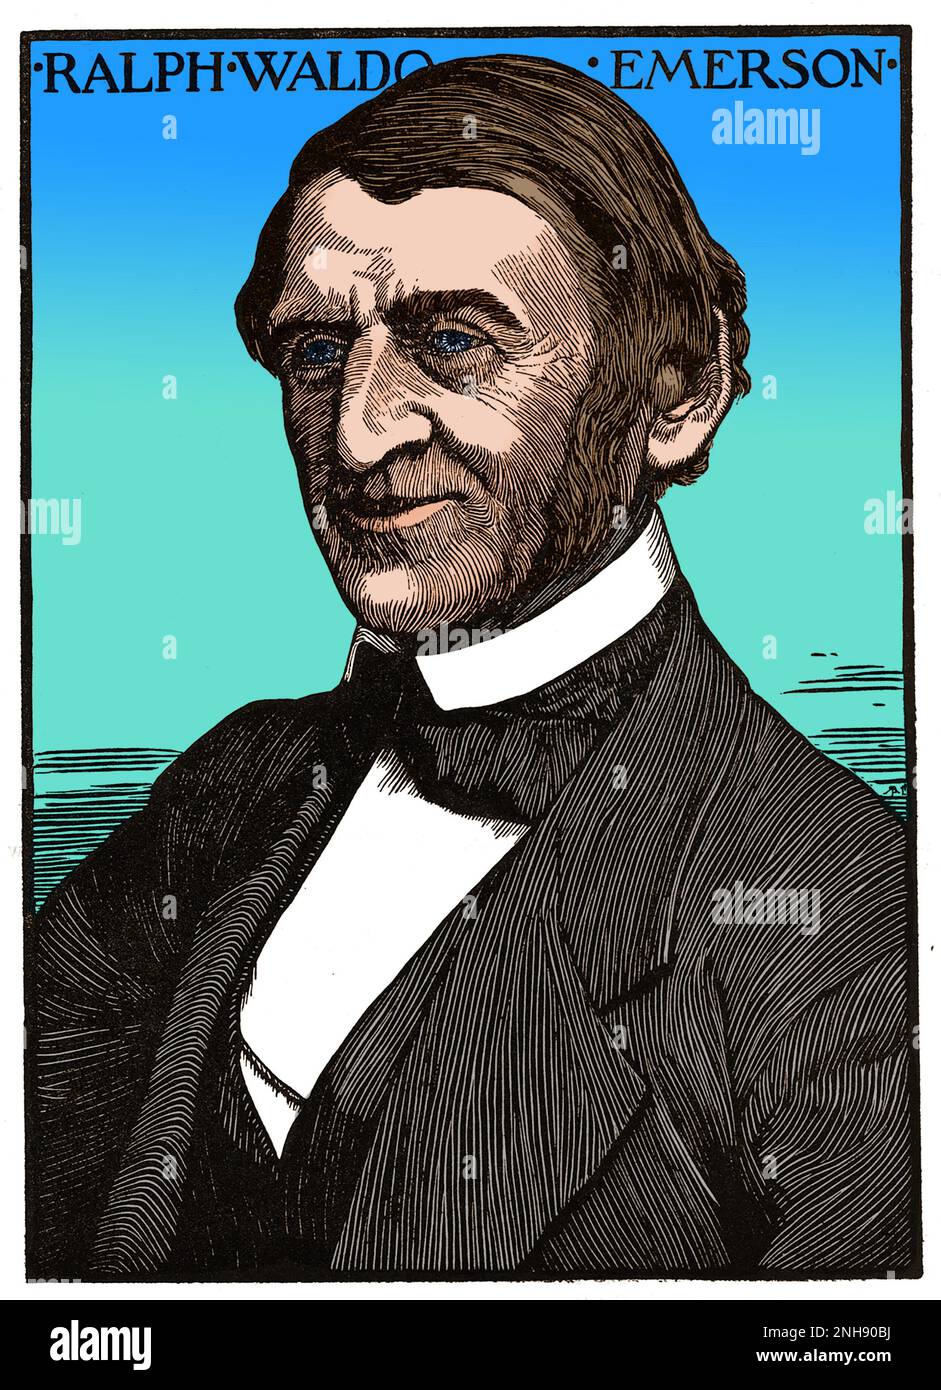 Ralph Waldo Emerson (1803-1882), American essayist, lecturer, philosopher, abolitionist, and poet who led the transcendentalist movement of the mid-19th century. Woodcut by Robert Bryden (1865-1939), a Scots artist and sculptor, 1901. Colorized. Stock Photo